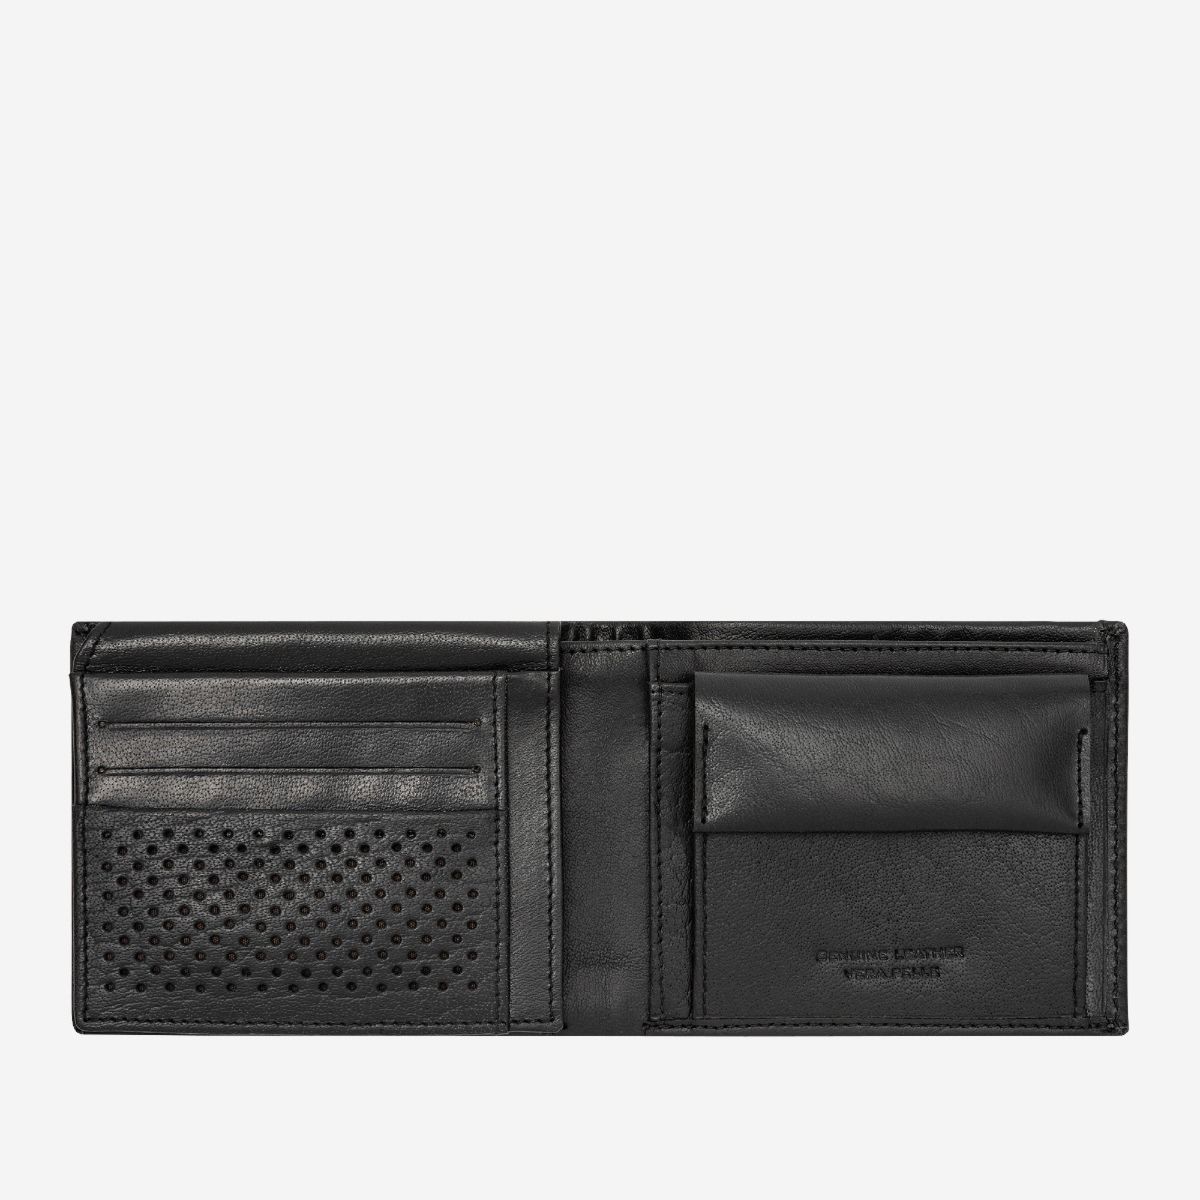 Leather Wallet With Coin Pocket For Men - Black